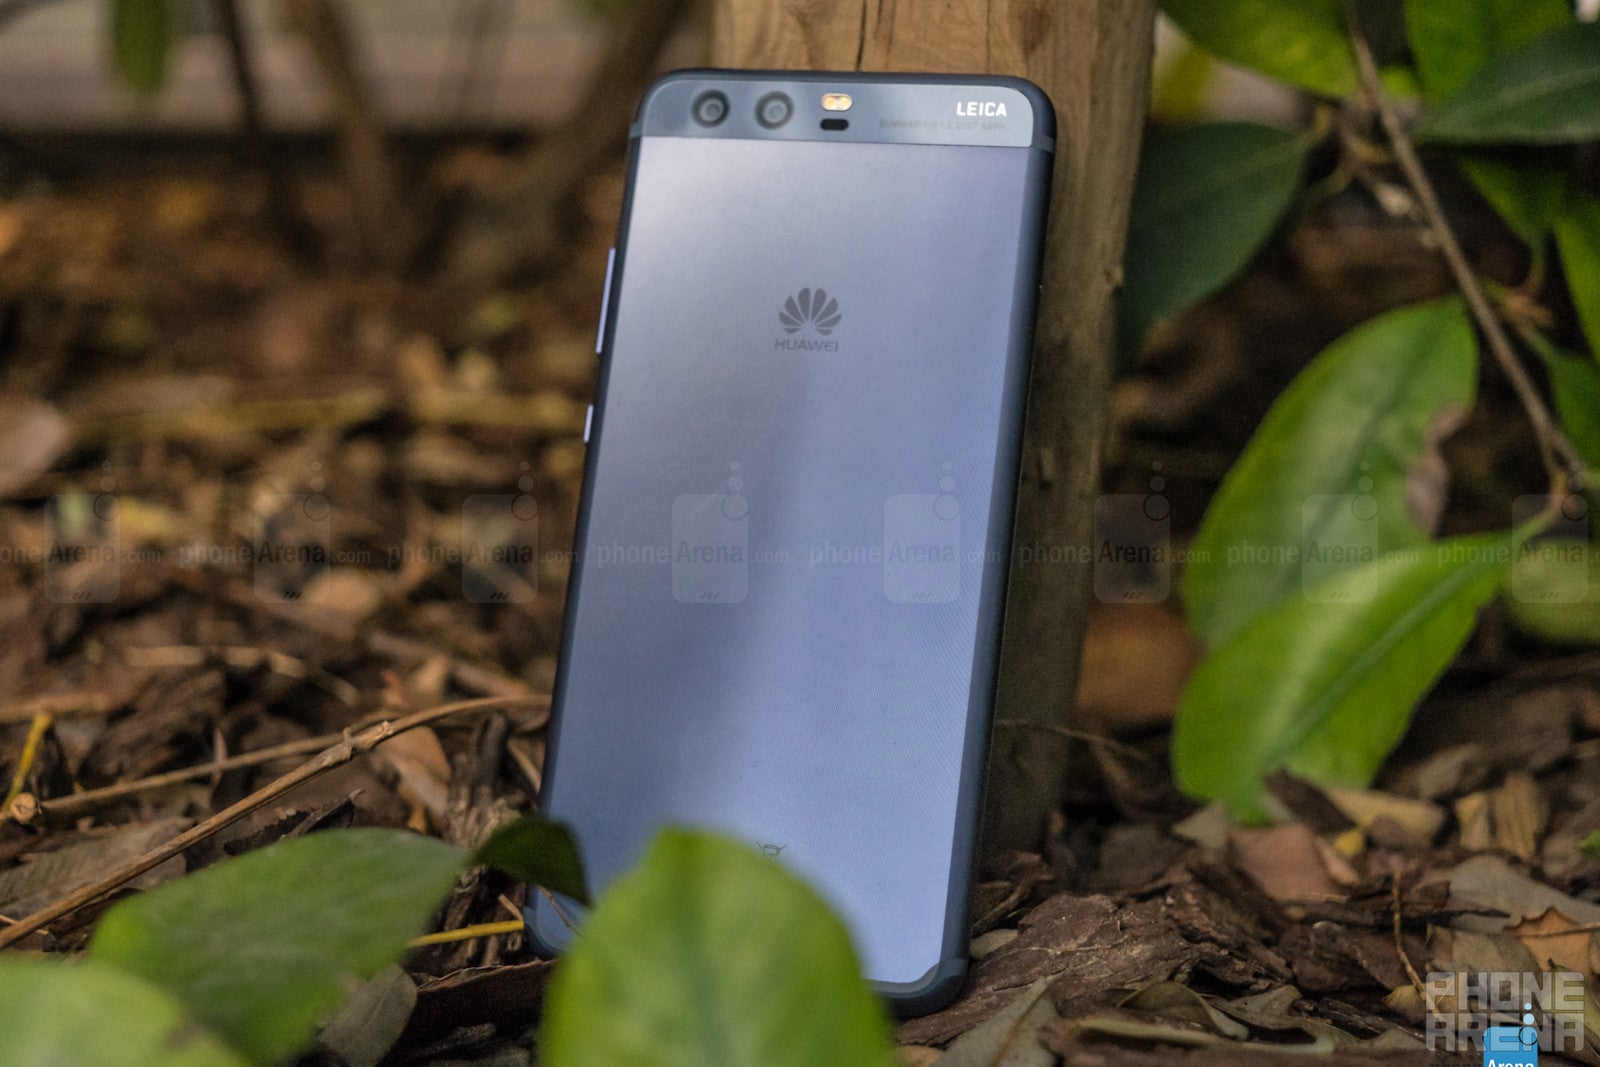 Huawei P10 &amp; P10 Plus: hands-on impressions of this sleek, dual-camera flagship